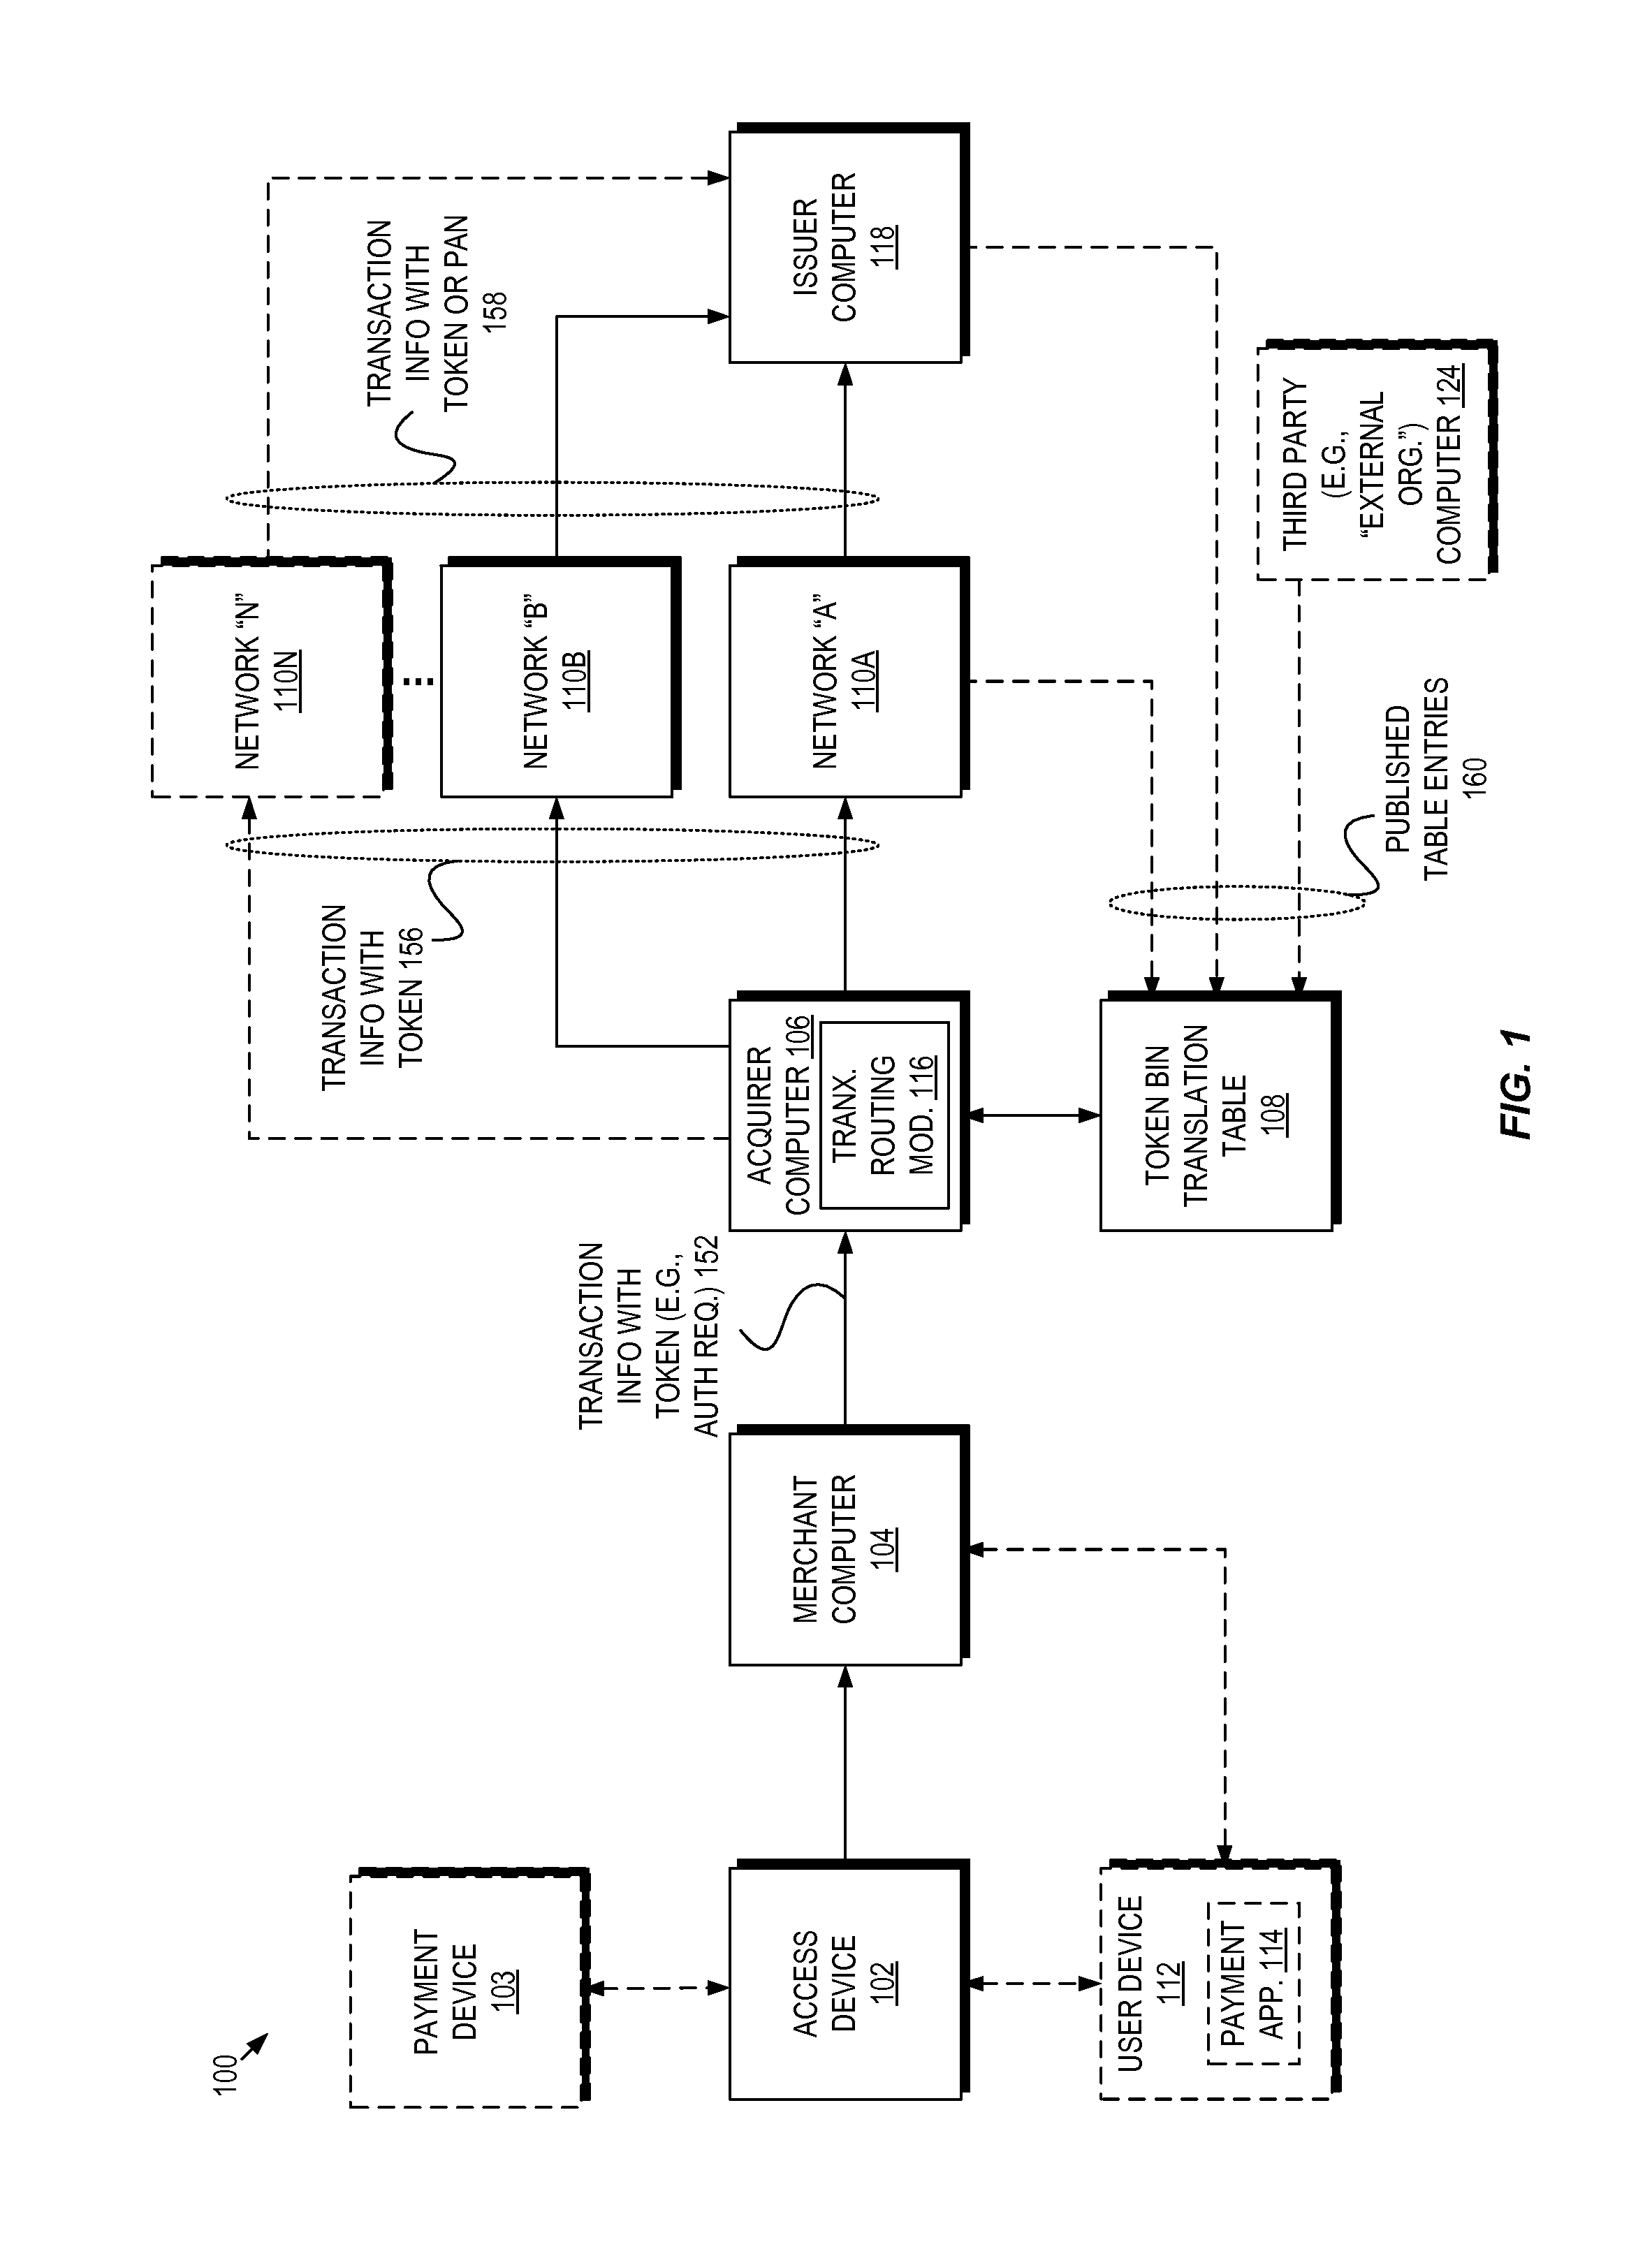 Multi-network token bin routing with defined verification parameters